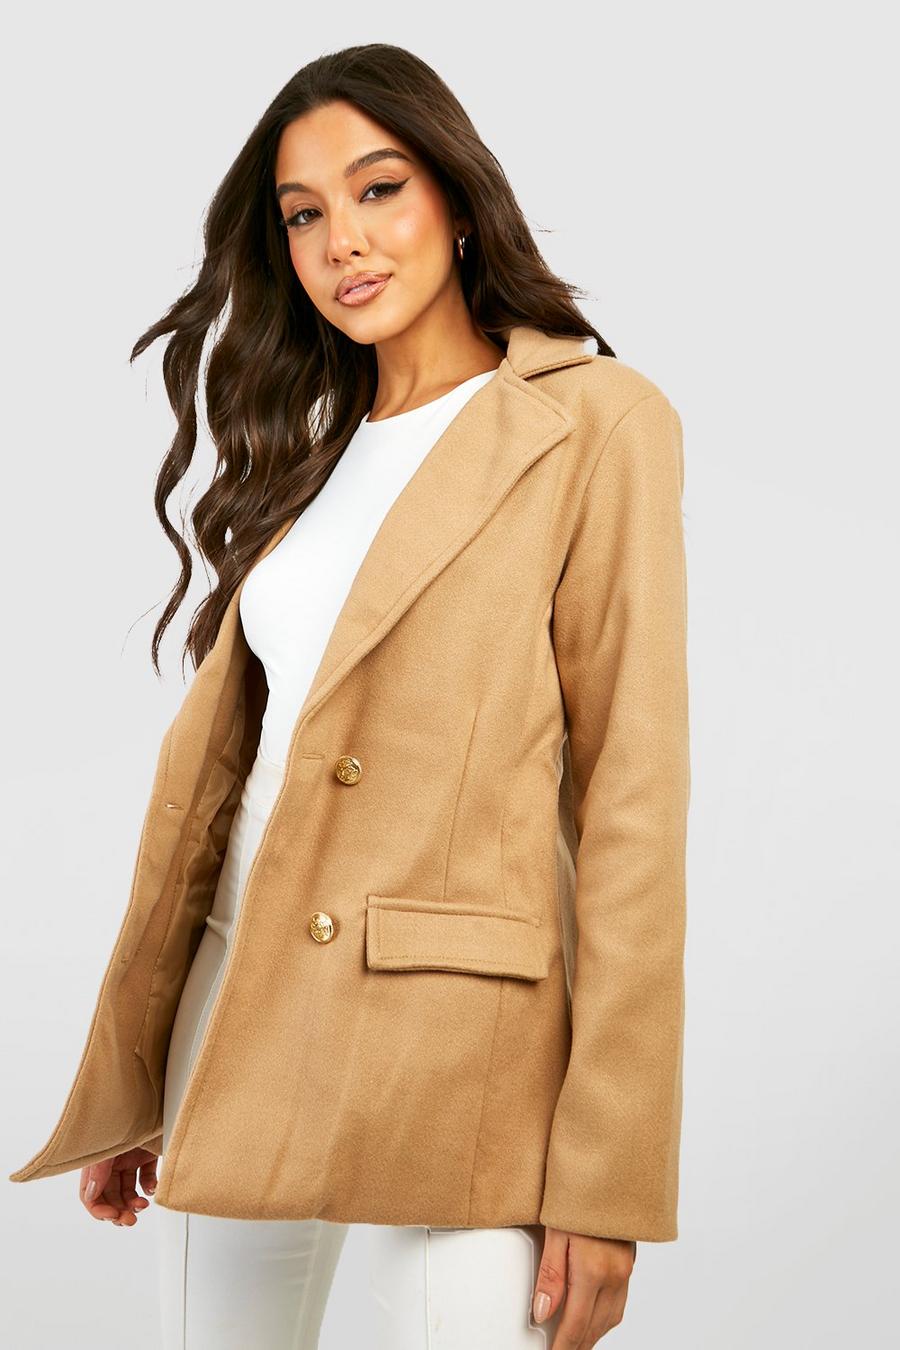 Camel beis Double Breasted Wool Look Blazer